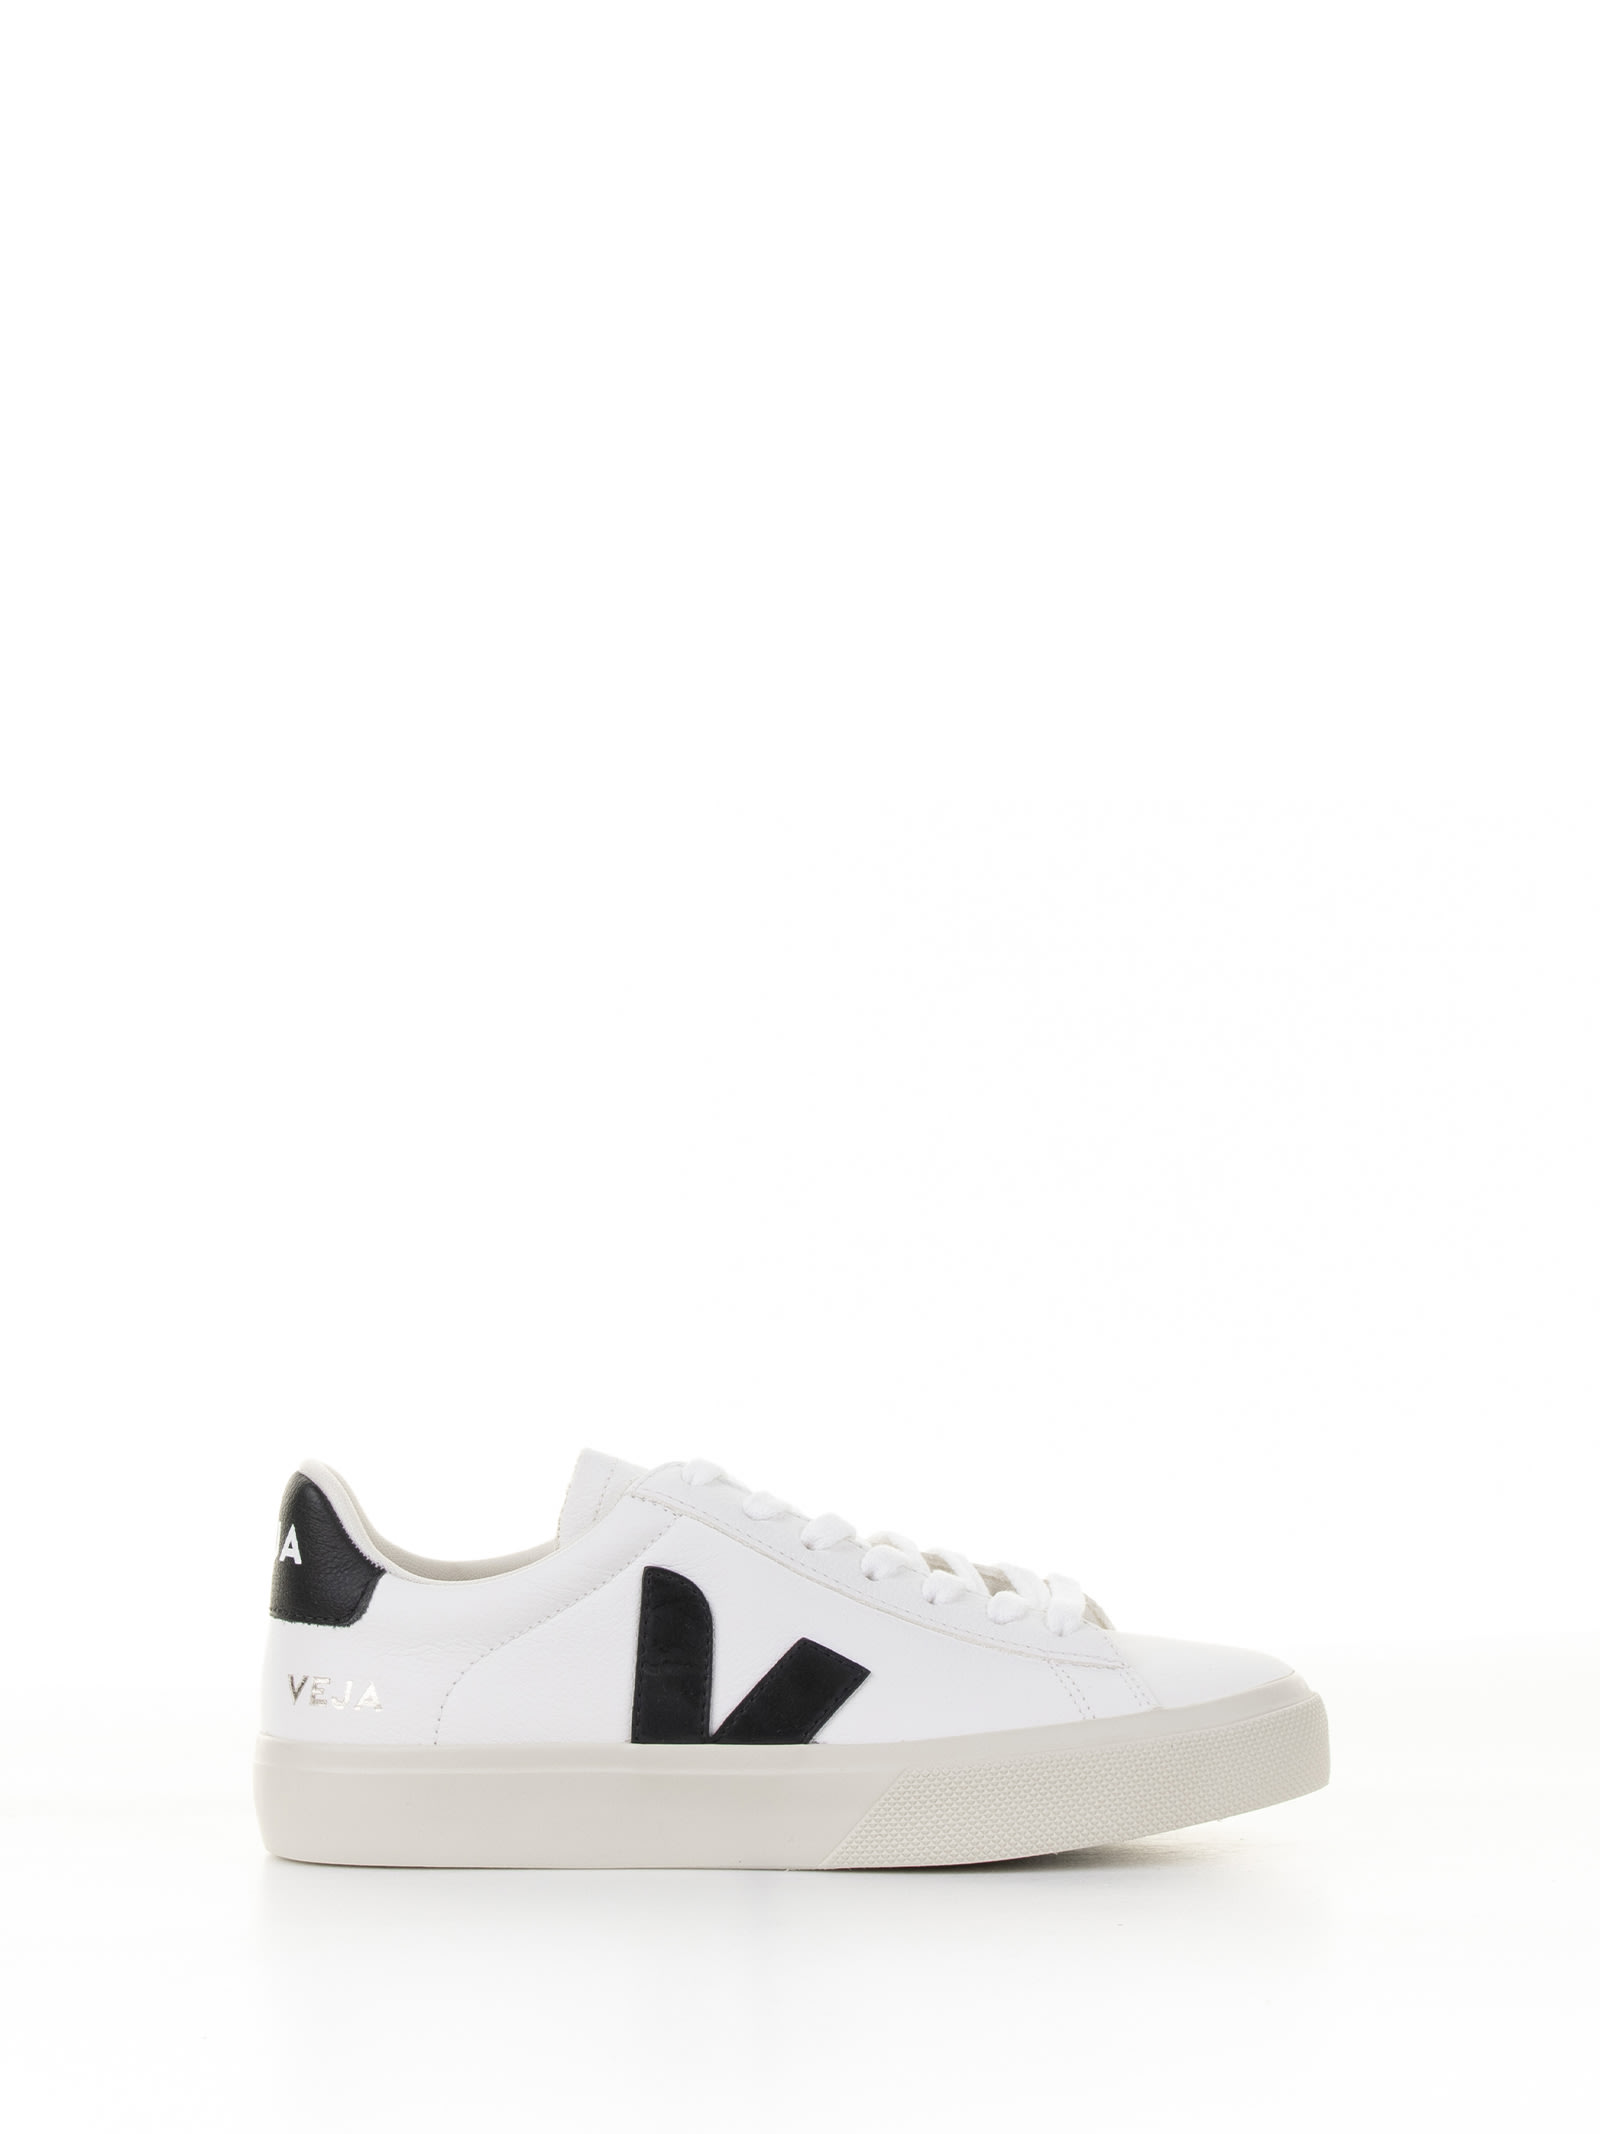 Shop Veja Campo Sneaker In White Black Leather For Women